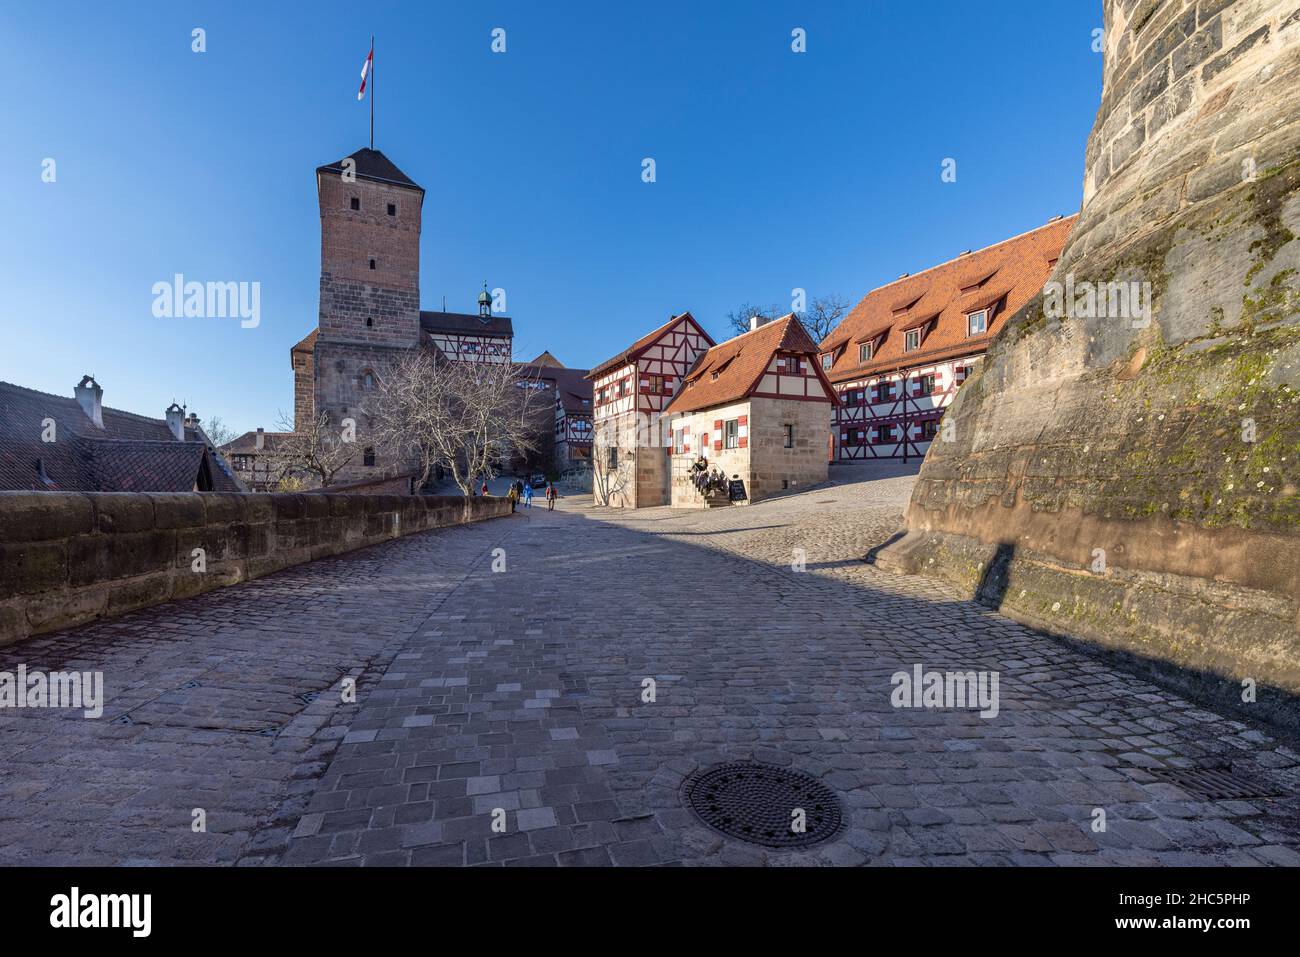 Nuremberg Castle Winter High Resolution Stock Photography and ...